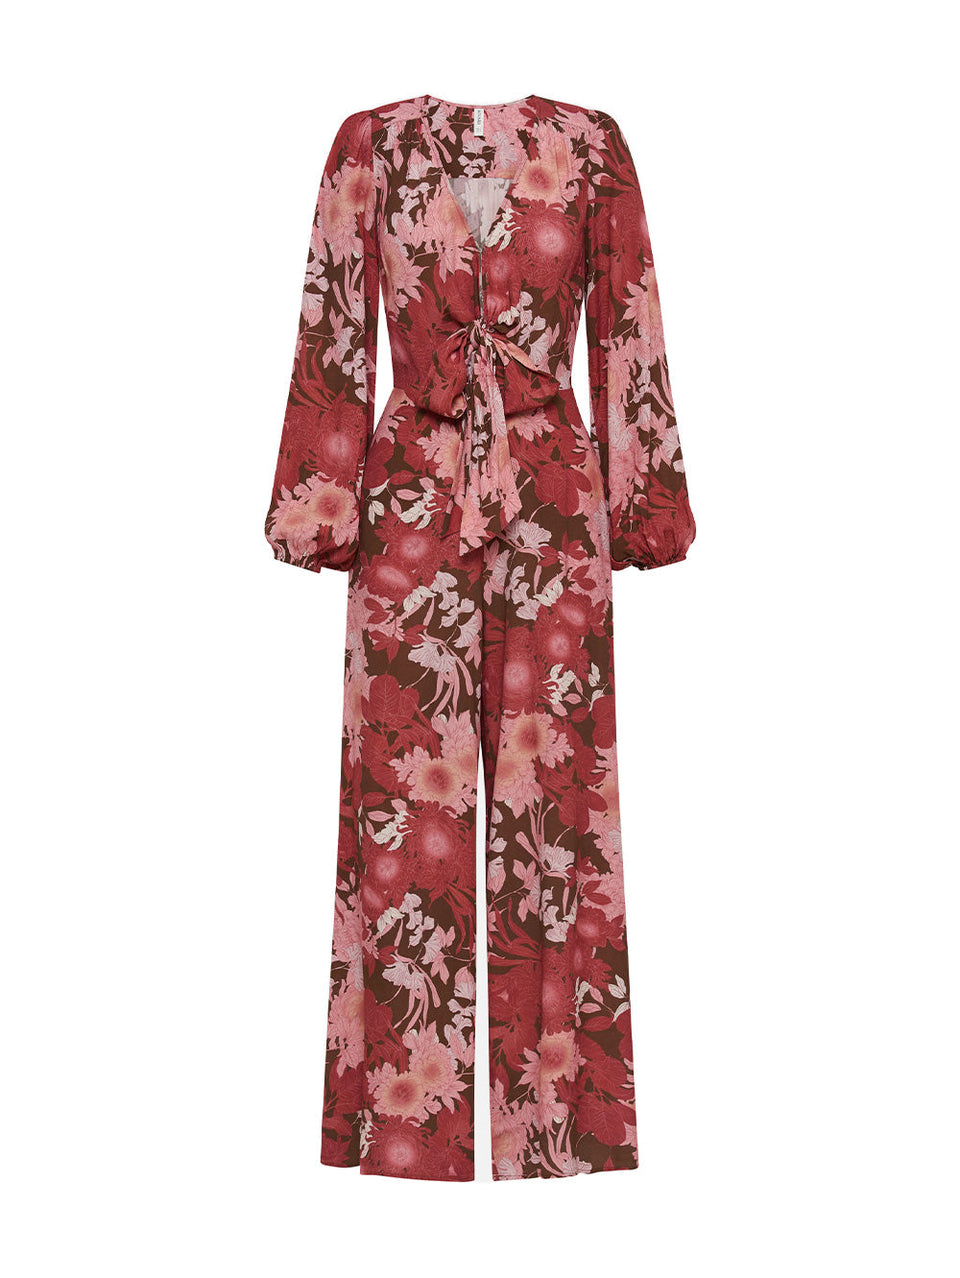 Ghost image of the KIVARI Hacienda Jumpsuit: A red, pink and brown floral jumpsuit with ribbon tie front and long sleeves, crafted from sustainable LENZING Viscose Crepe.